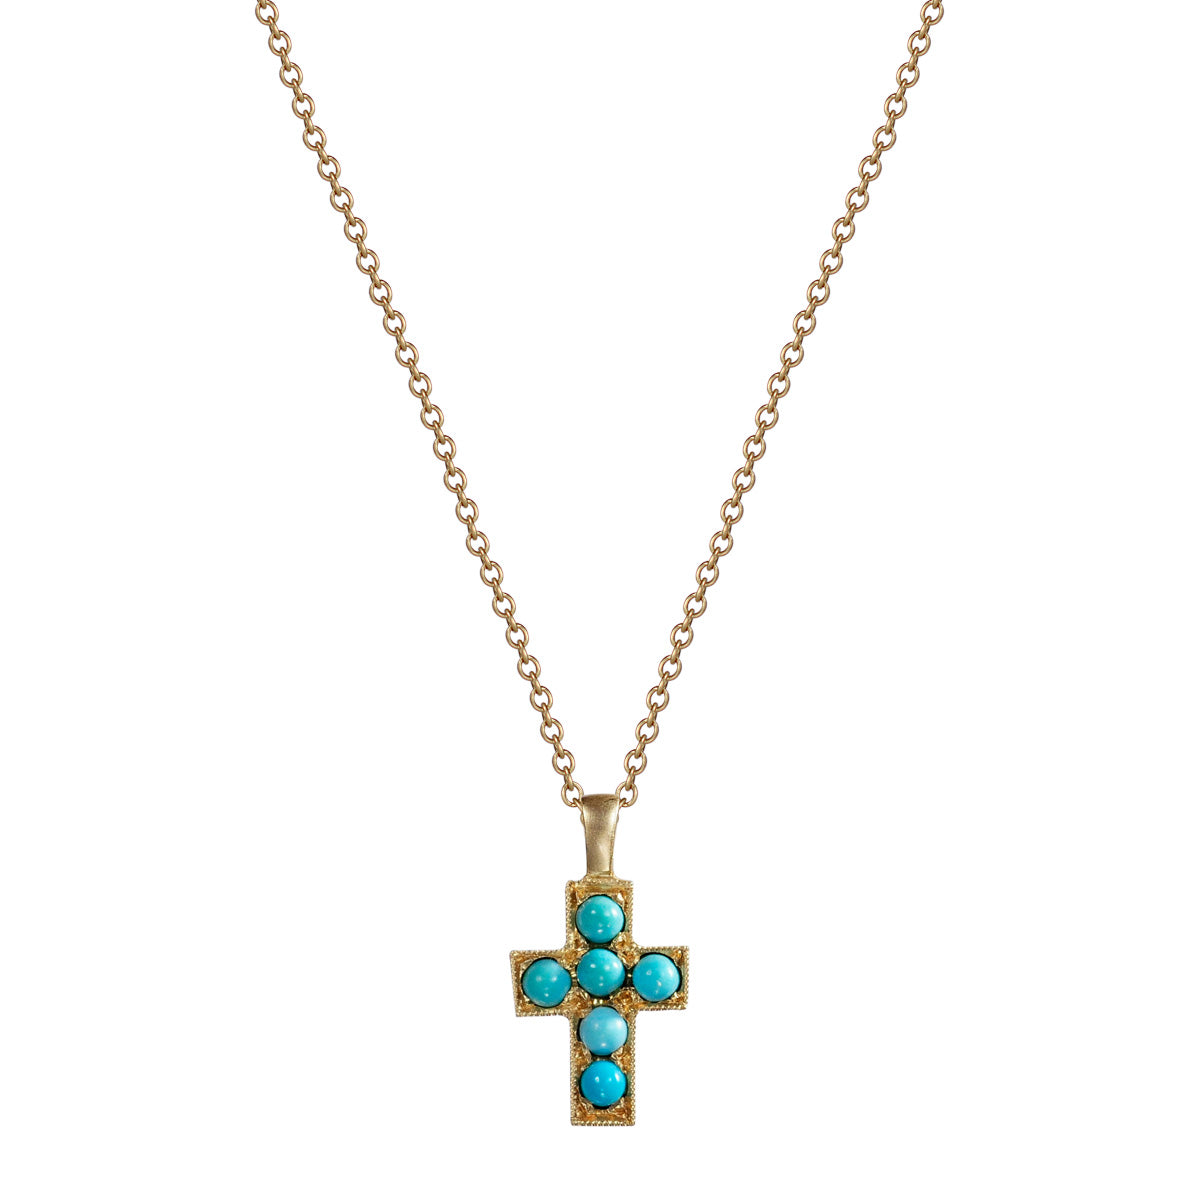 10K Gold Cross Pendant with Turquoise